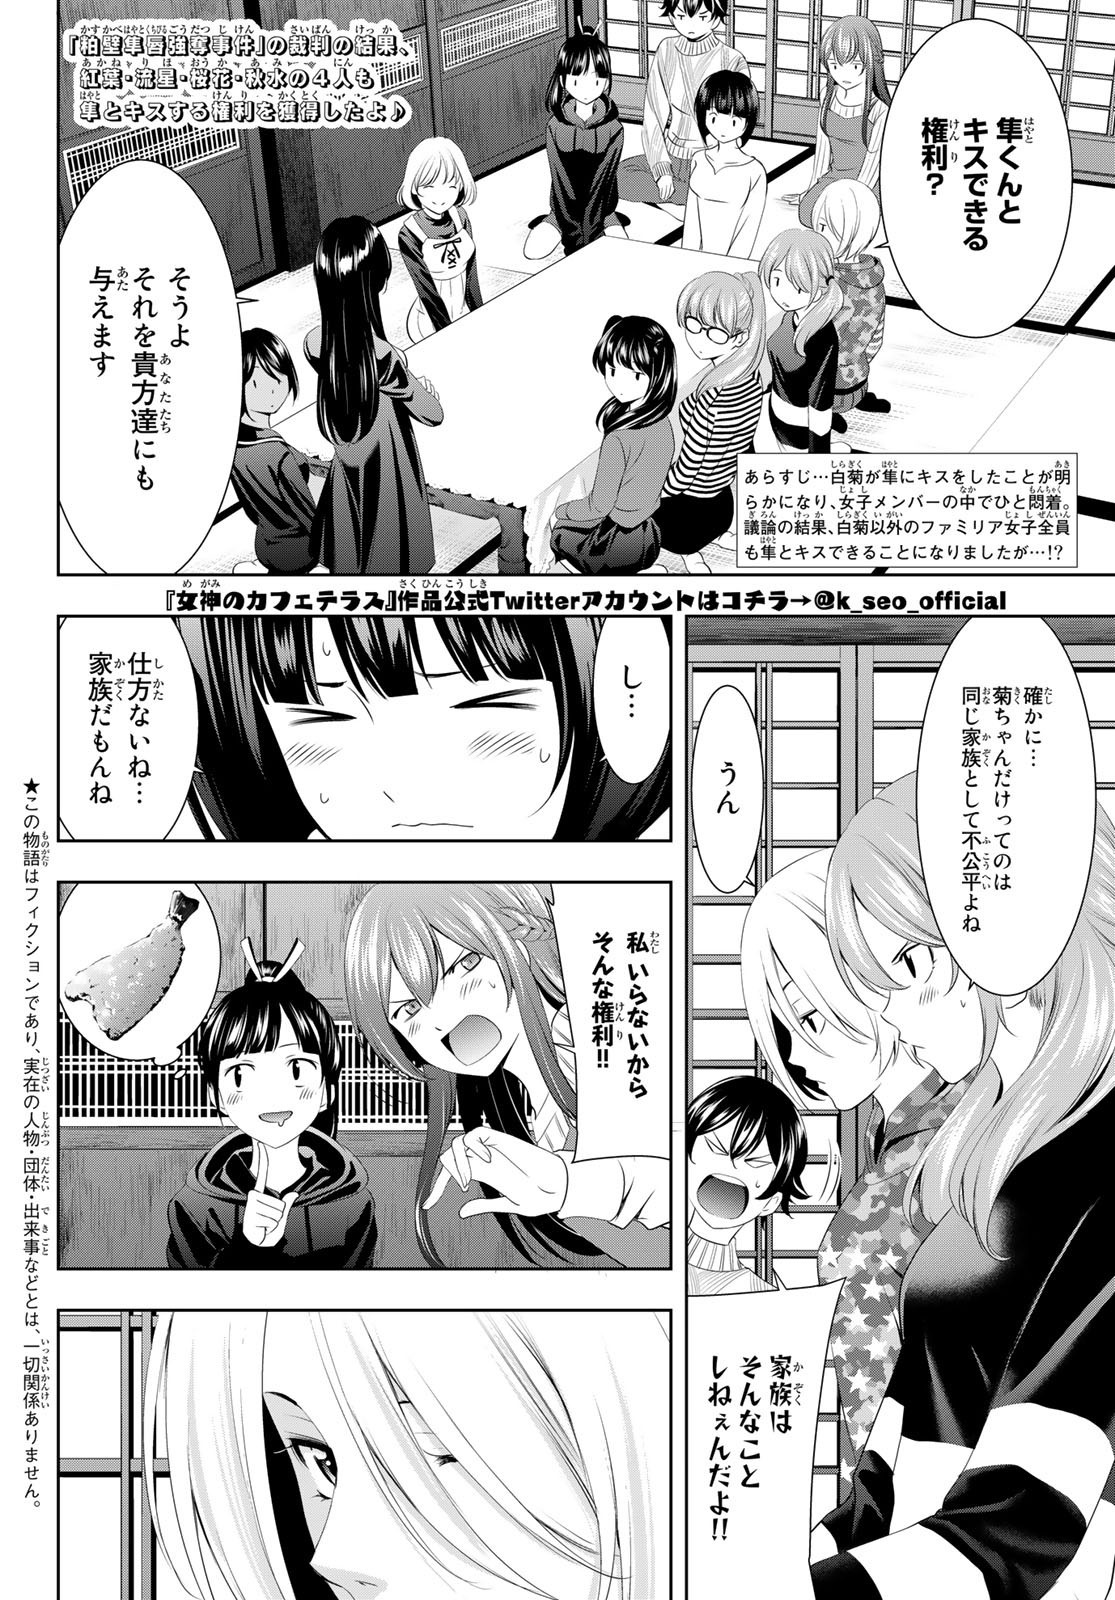 Goddess-Cafe-Terrace - Chapter 080 - Page 2